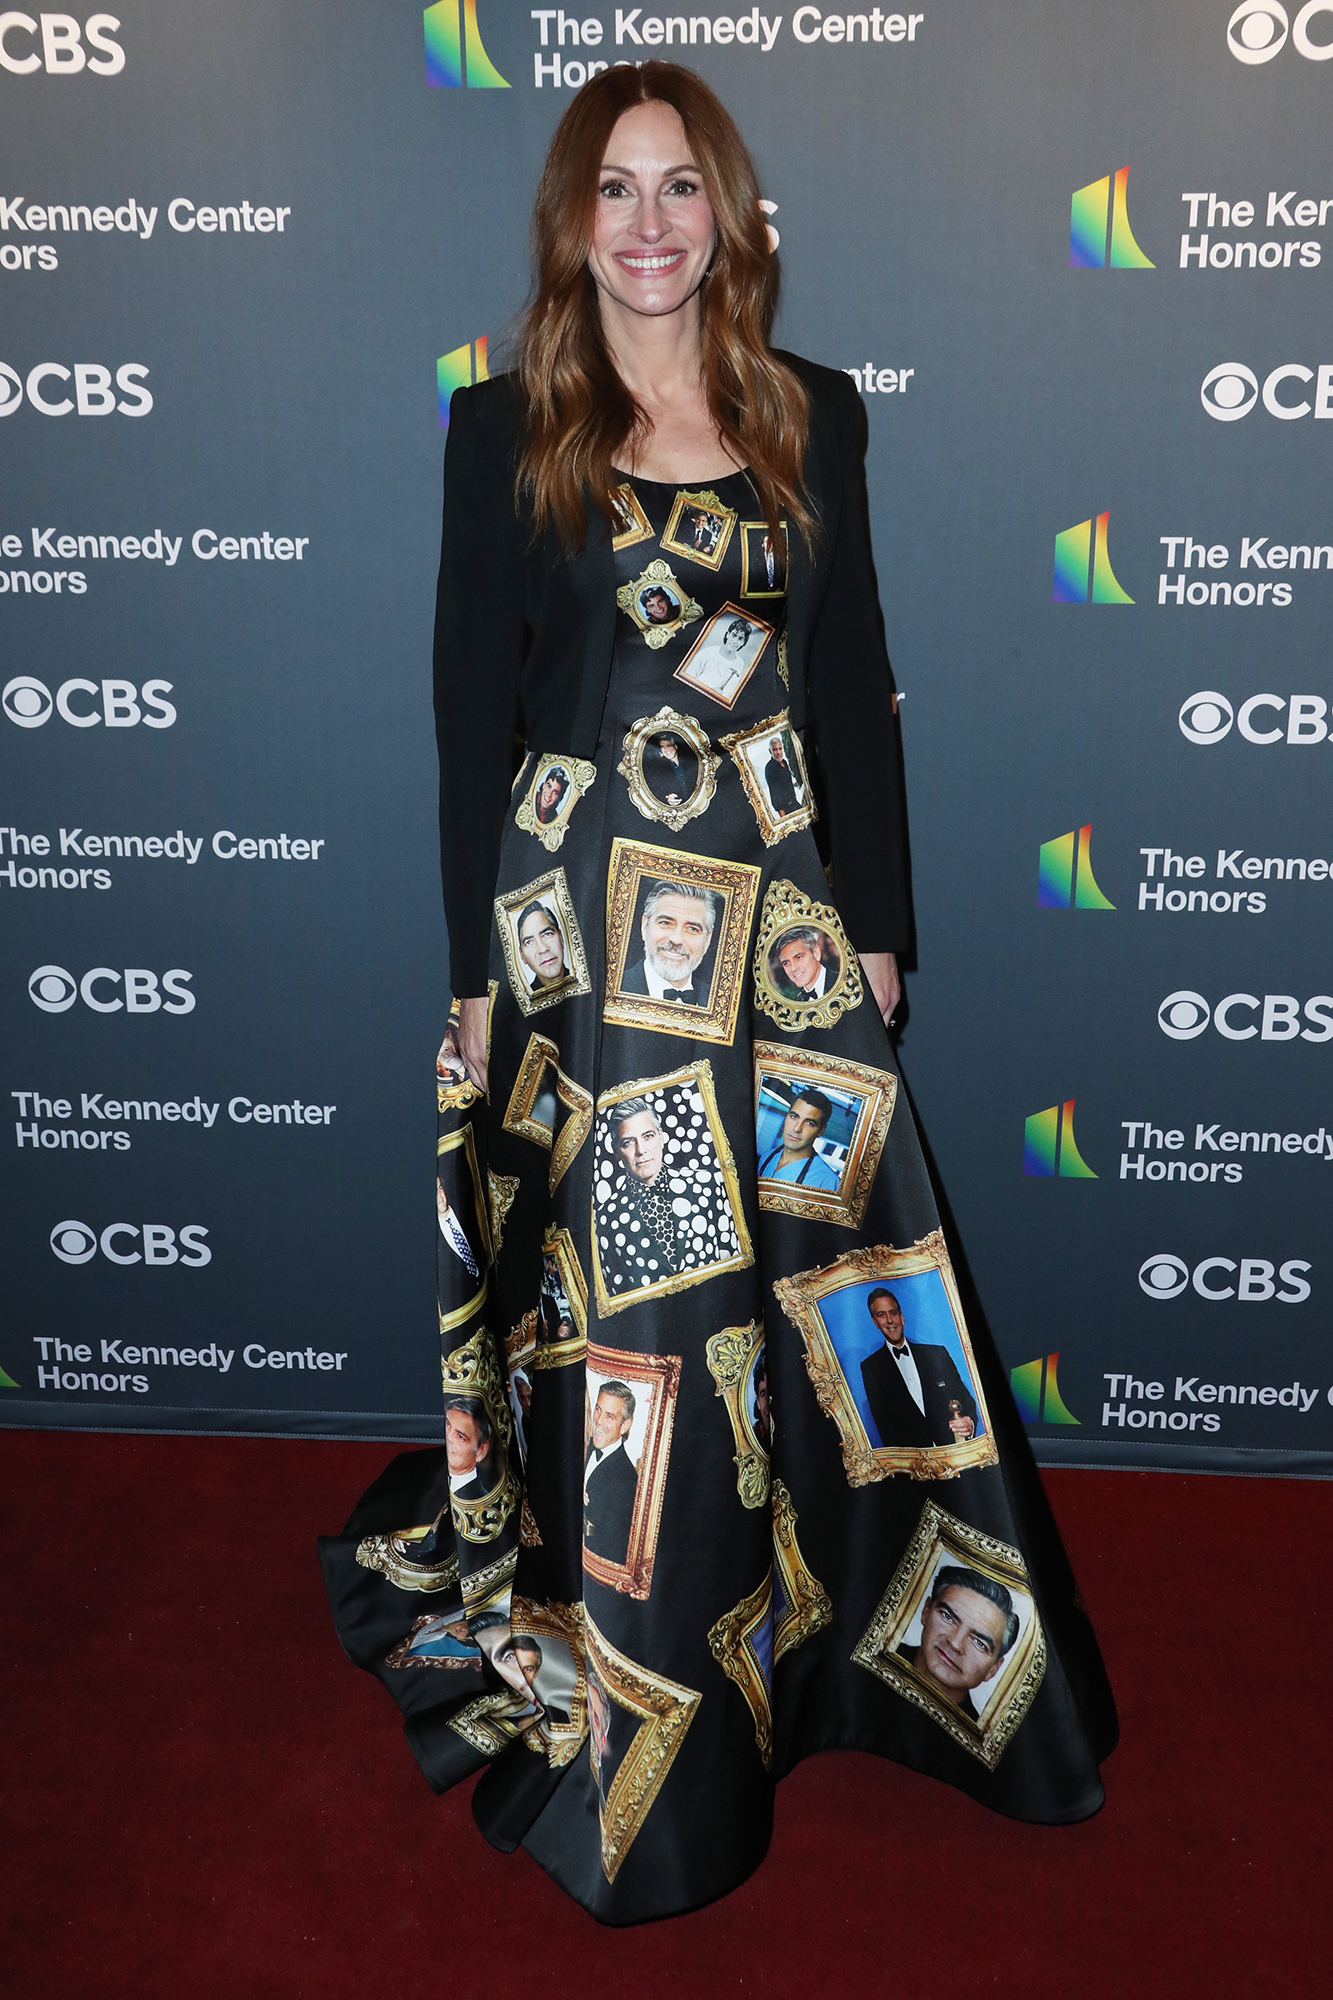 Julia Roberts Wears Dress Covered in George Clooney Pics